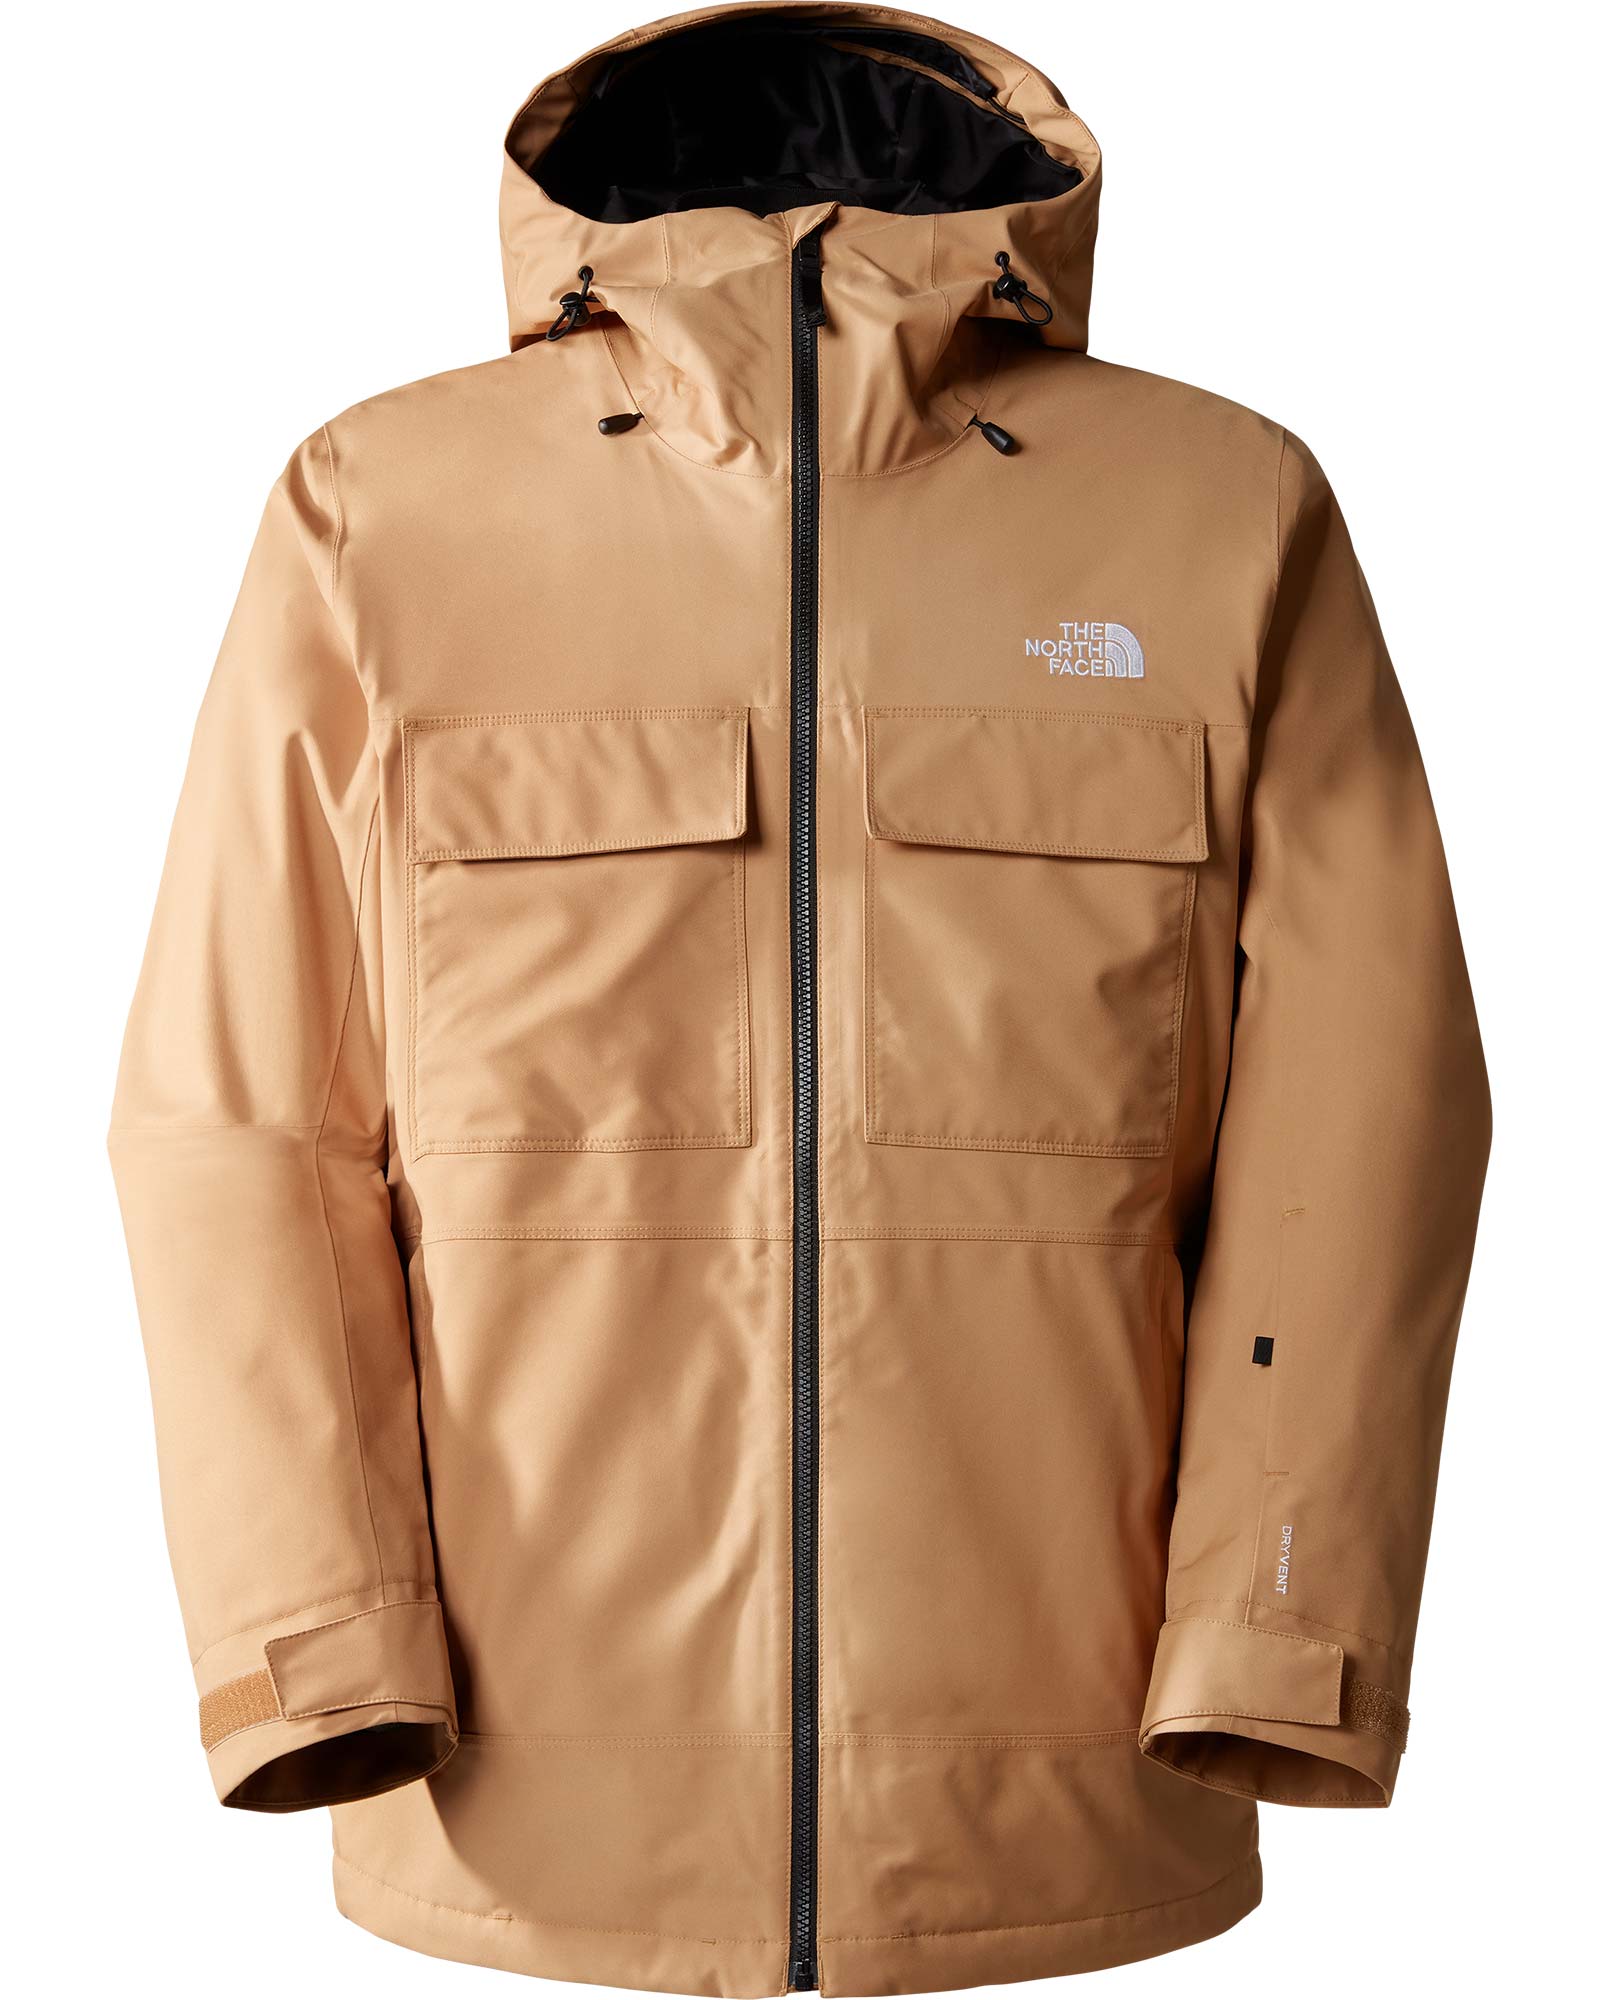 The North Face Men’s Fourbarrel Triclimate Jacket - Almond Butter/TNF Black XL